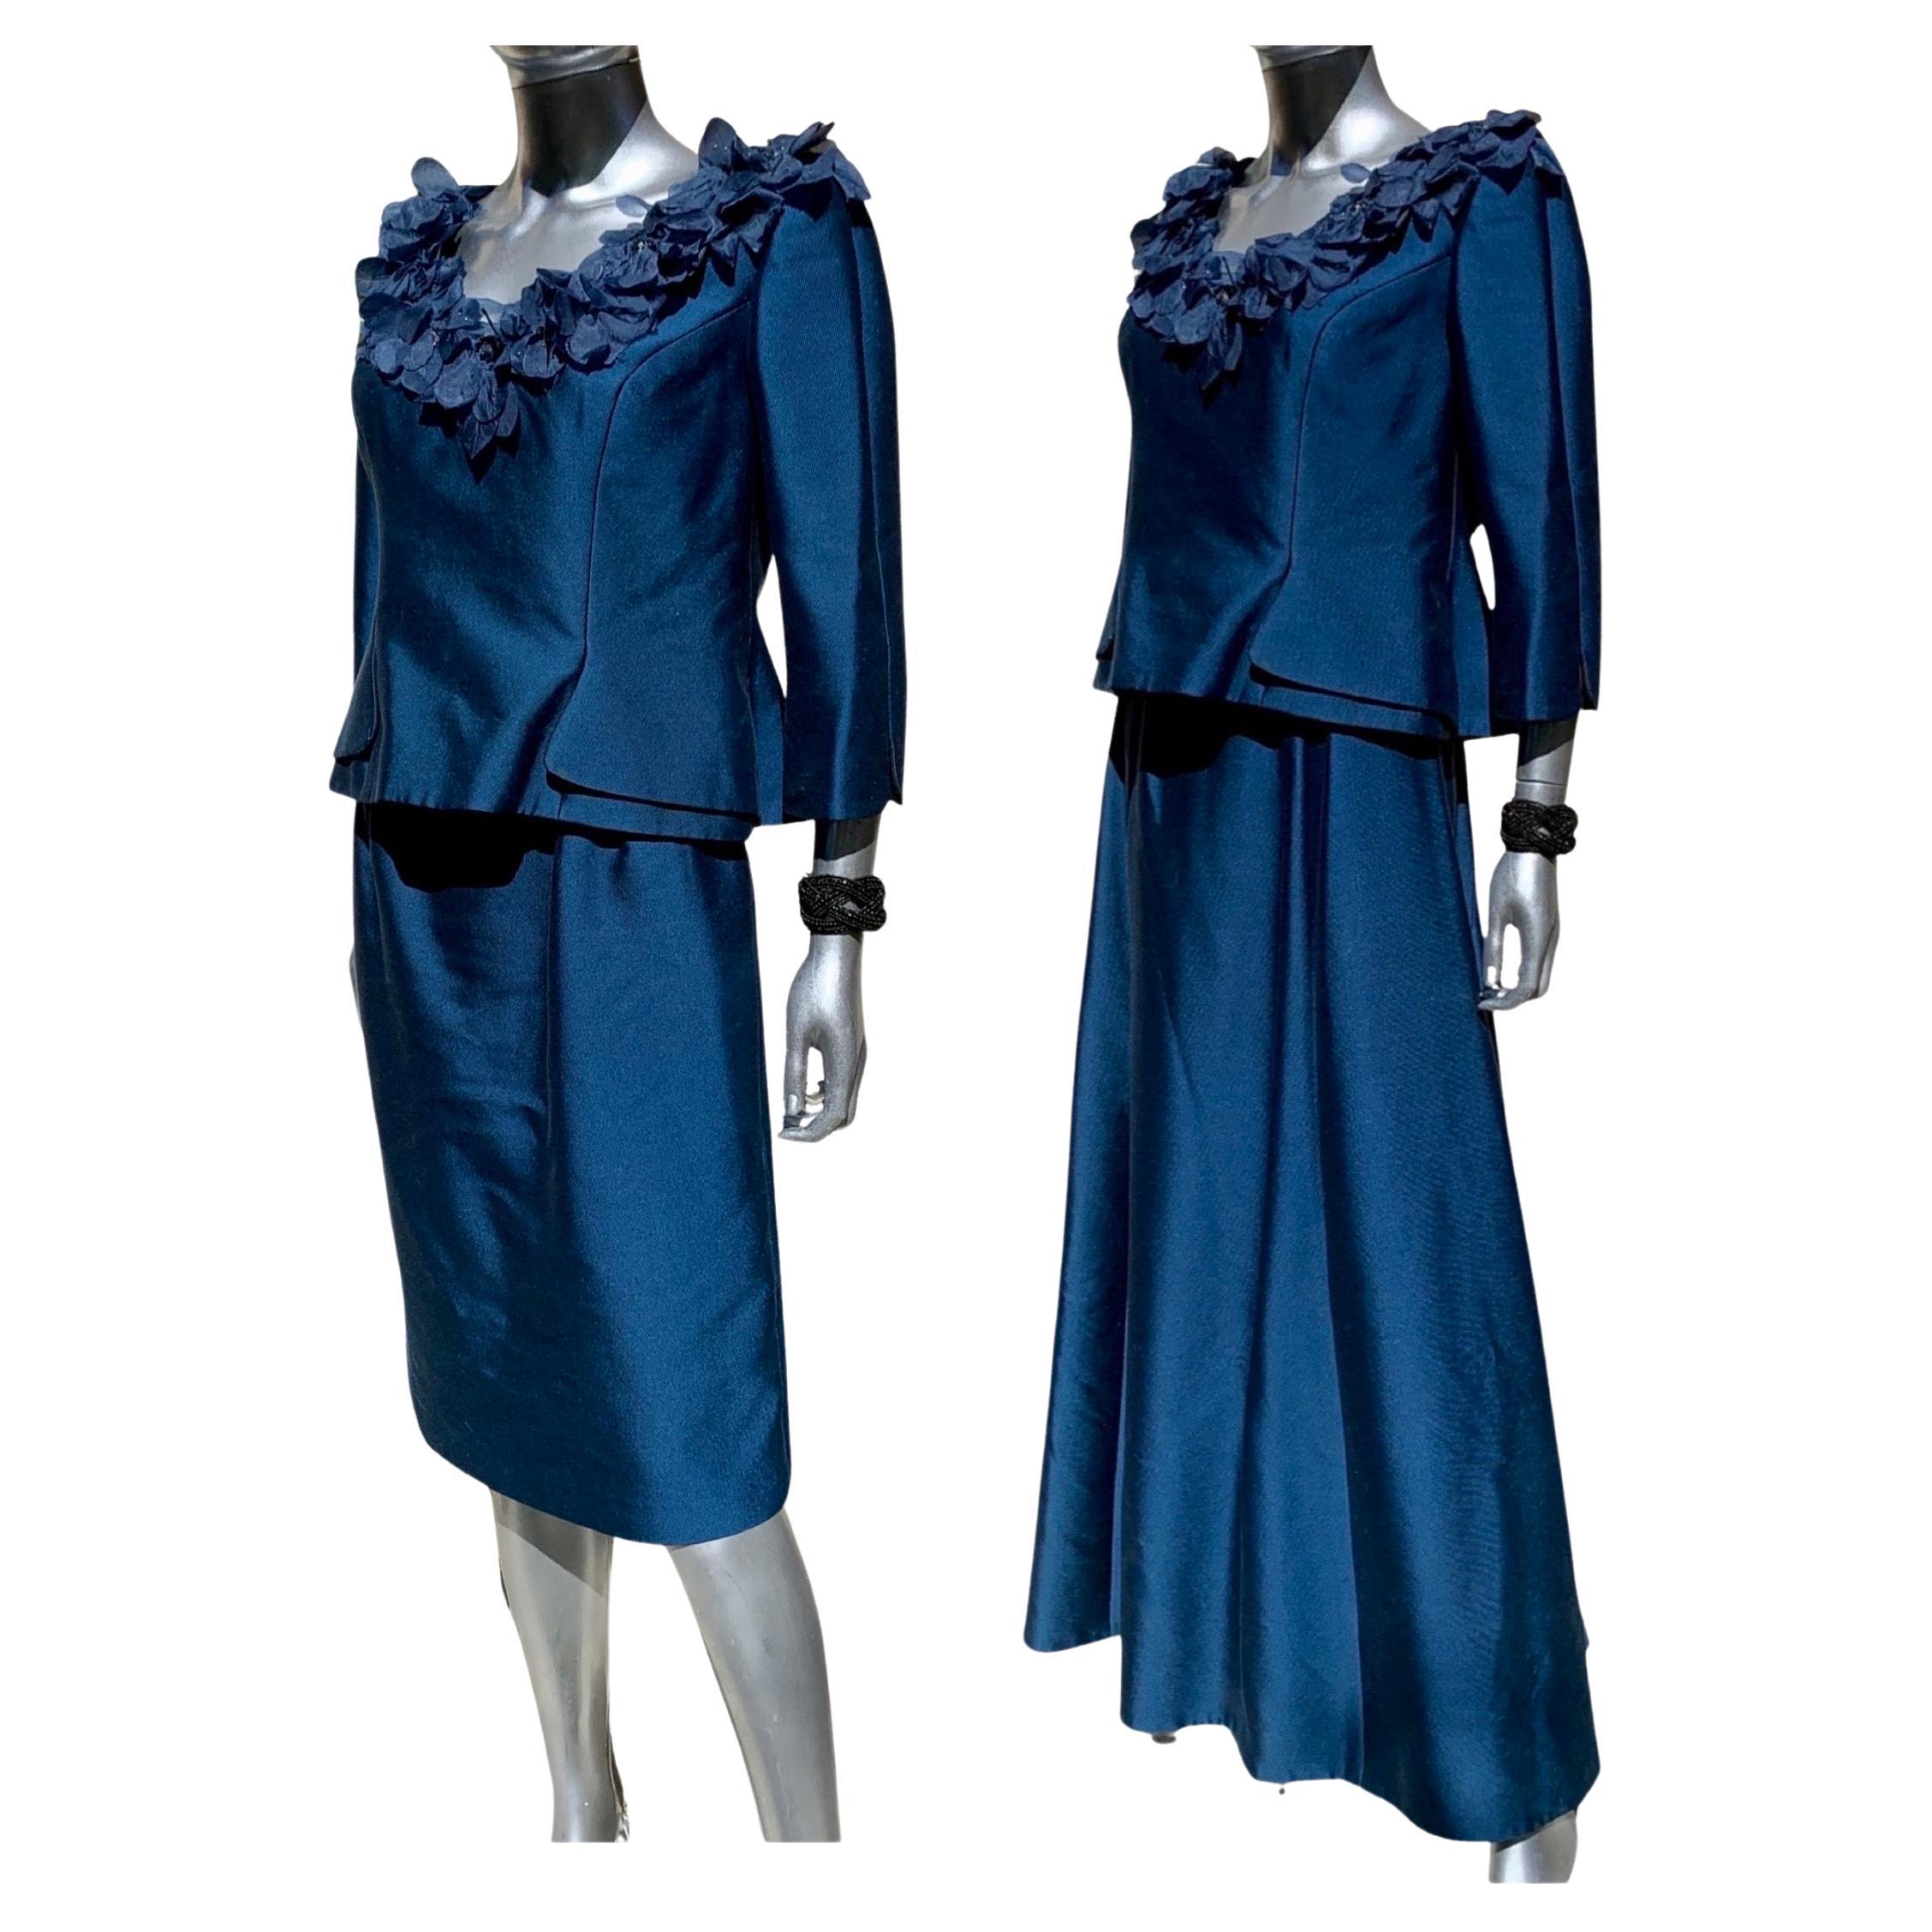 Three Piece Saphire Blue Couture Evening Ensemble by Lily Samii SF Size 8 For Sale